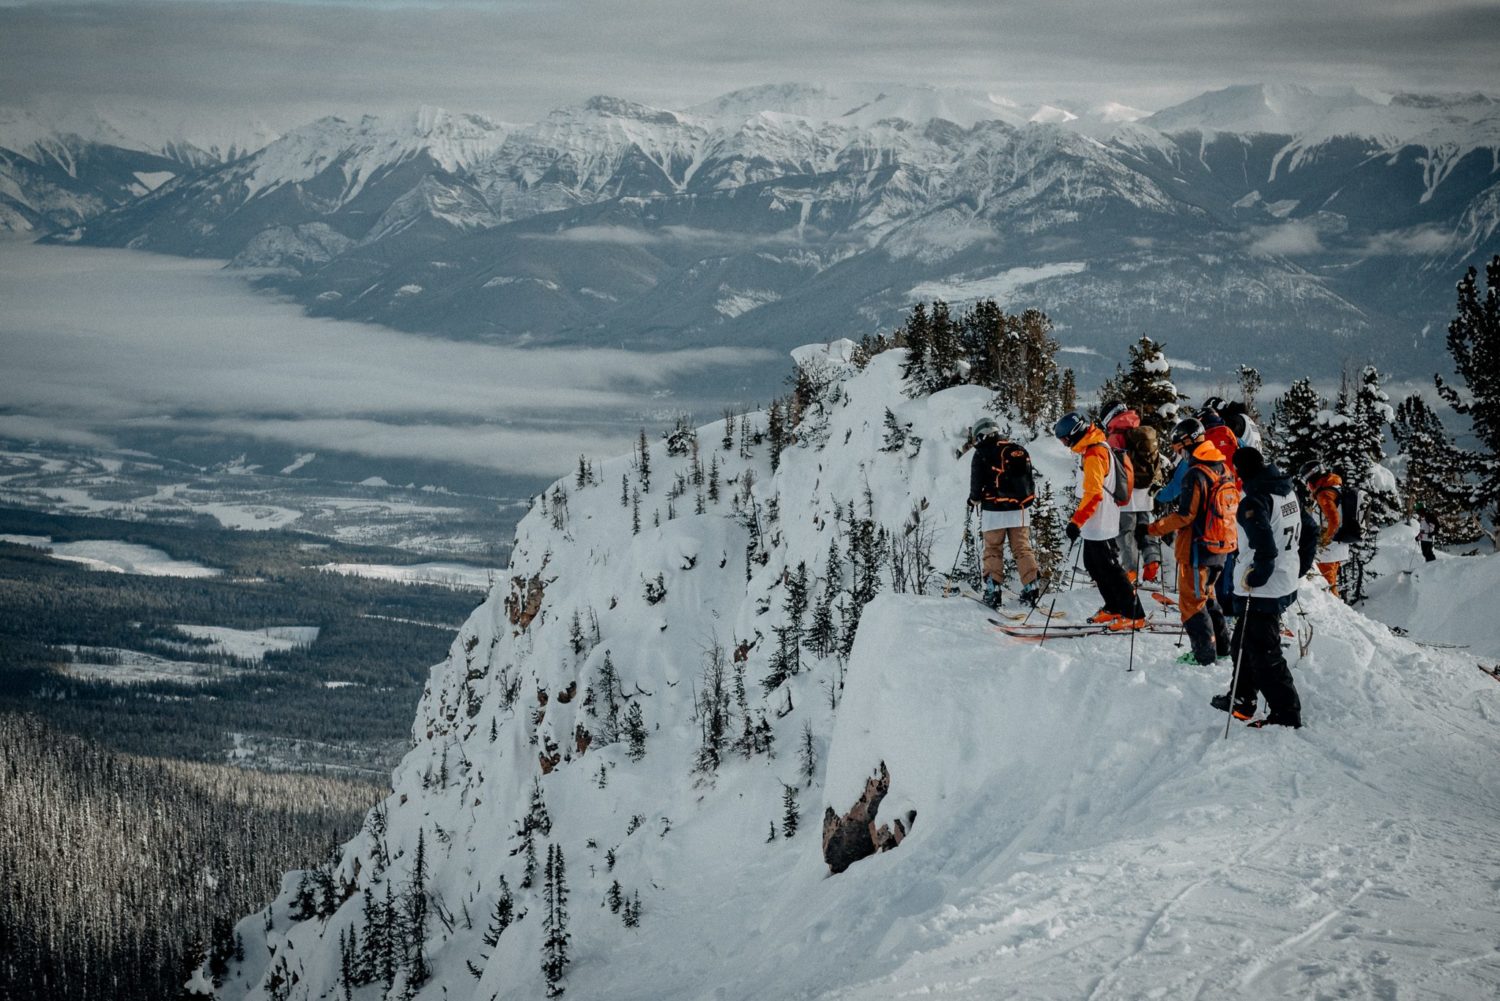 Skiers line up before dropping into the Freeride World Qualifiers